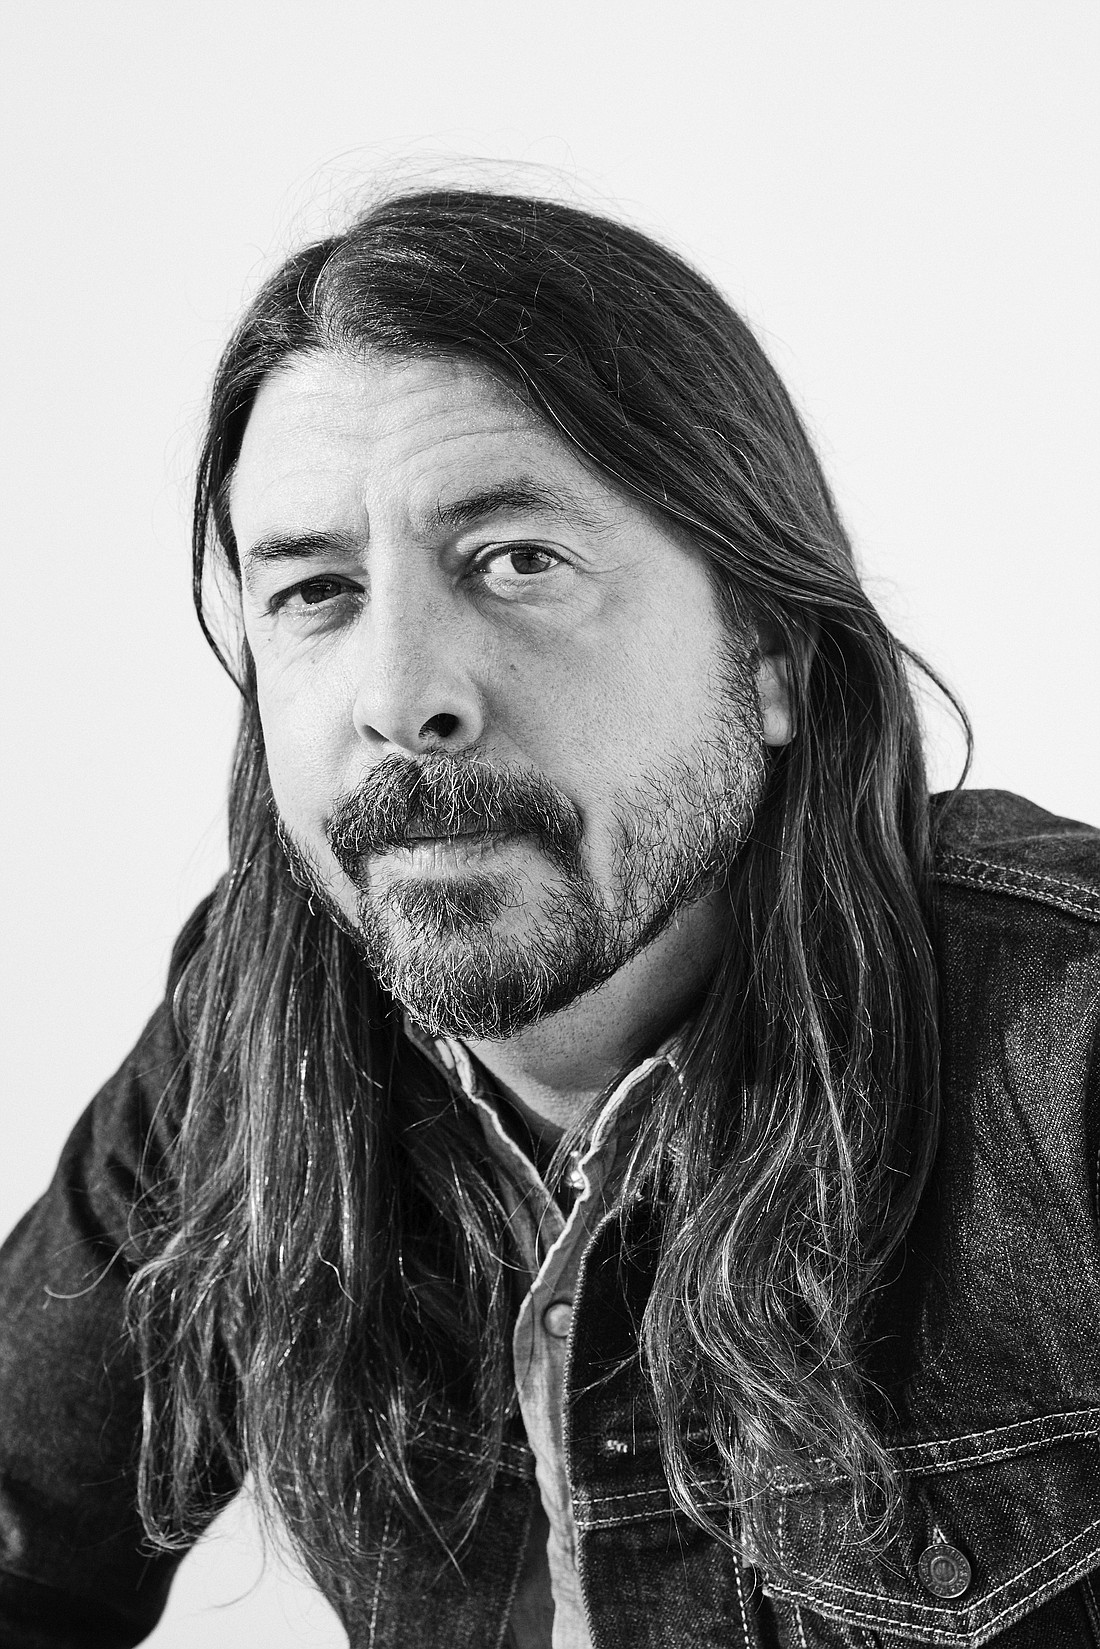 During the pandemic lockdown, Nirvana and Foo Fighters musician Dave Grohl channeled his creative energy into crafting a book filled with colorful anecdotes and celebrity cameos. “The Storyteller: Tales of Life and Music” is an apt title, as Grohl knows how to spin a yarn.